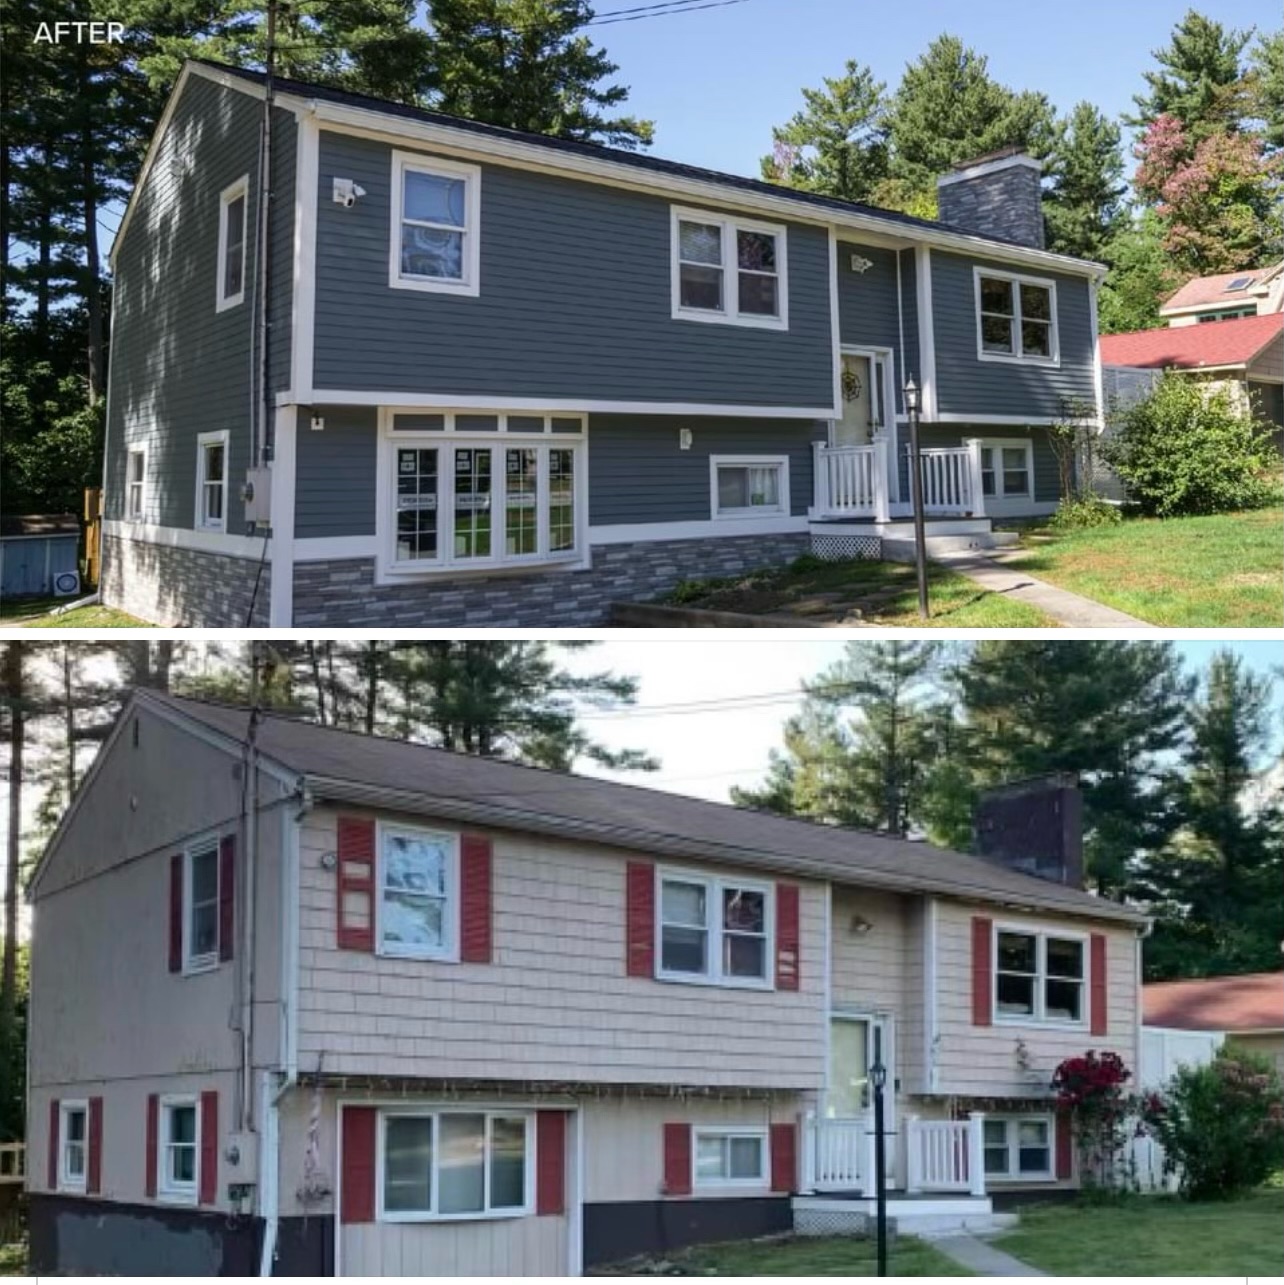 This transformation of this modest New Hampshire home was like night and day, reaching a new level of curb appeal.